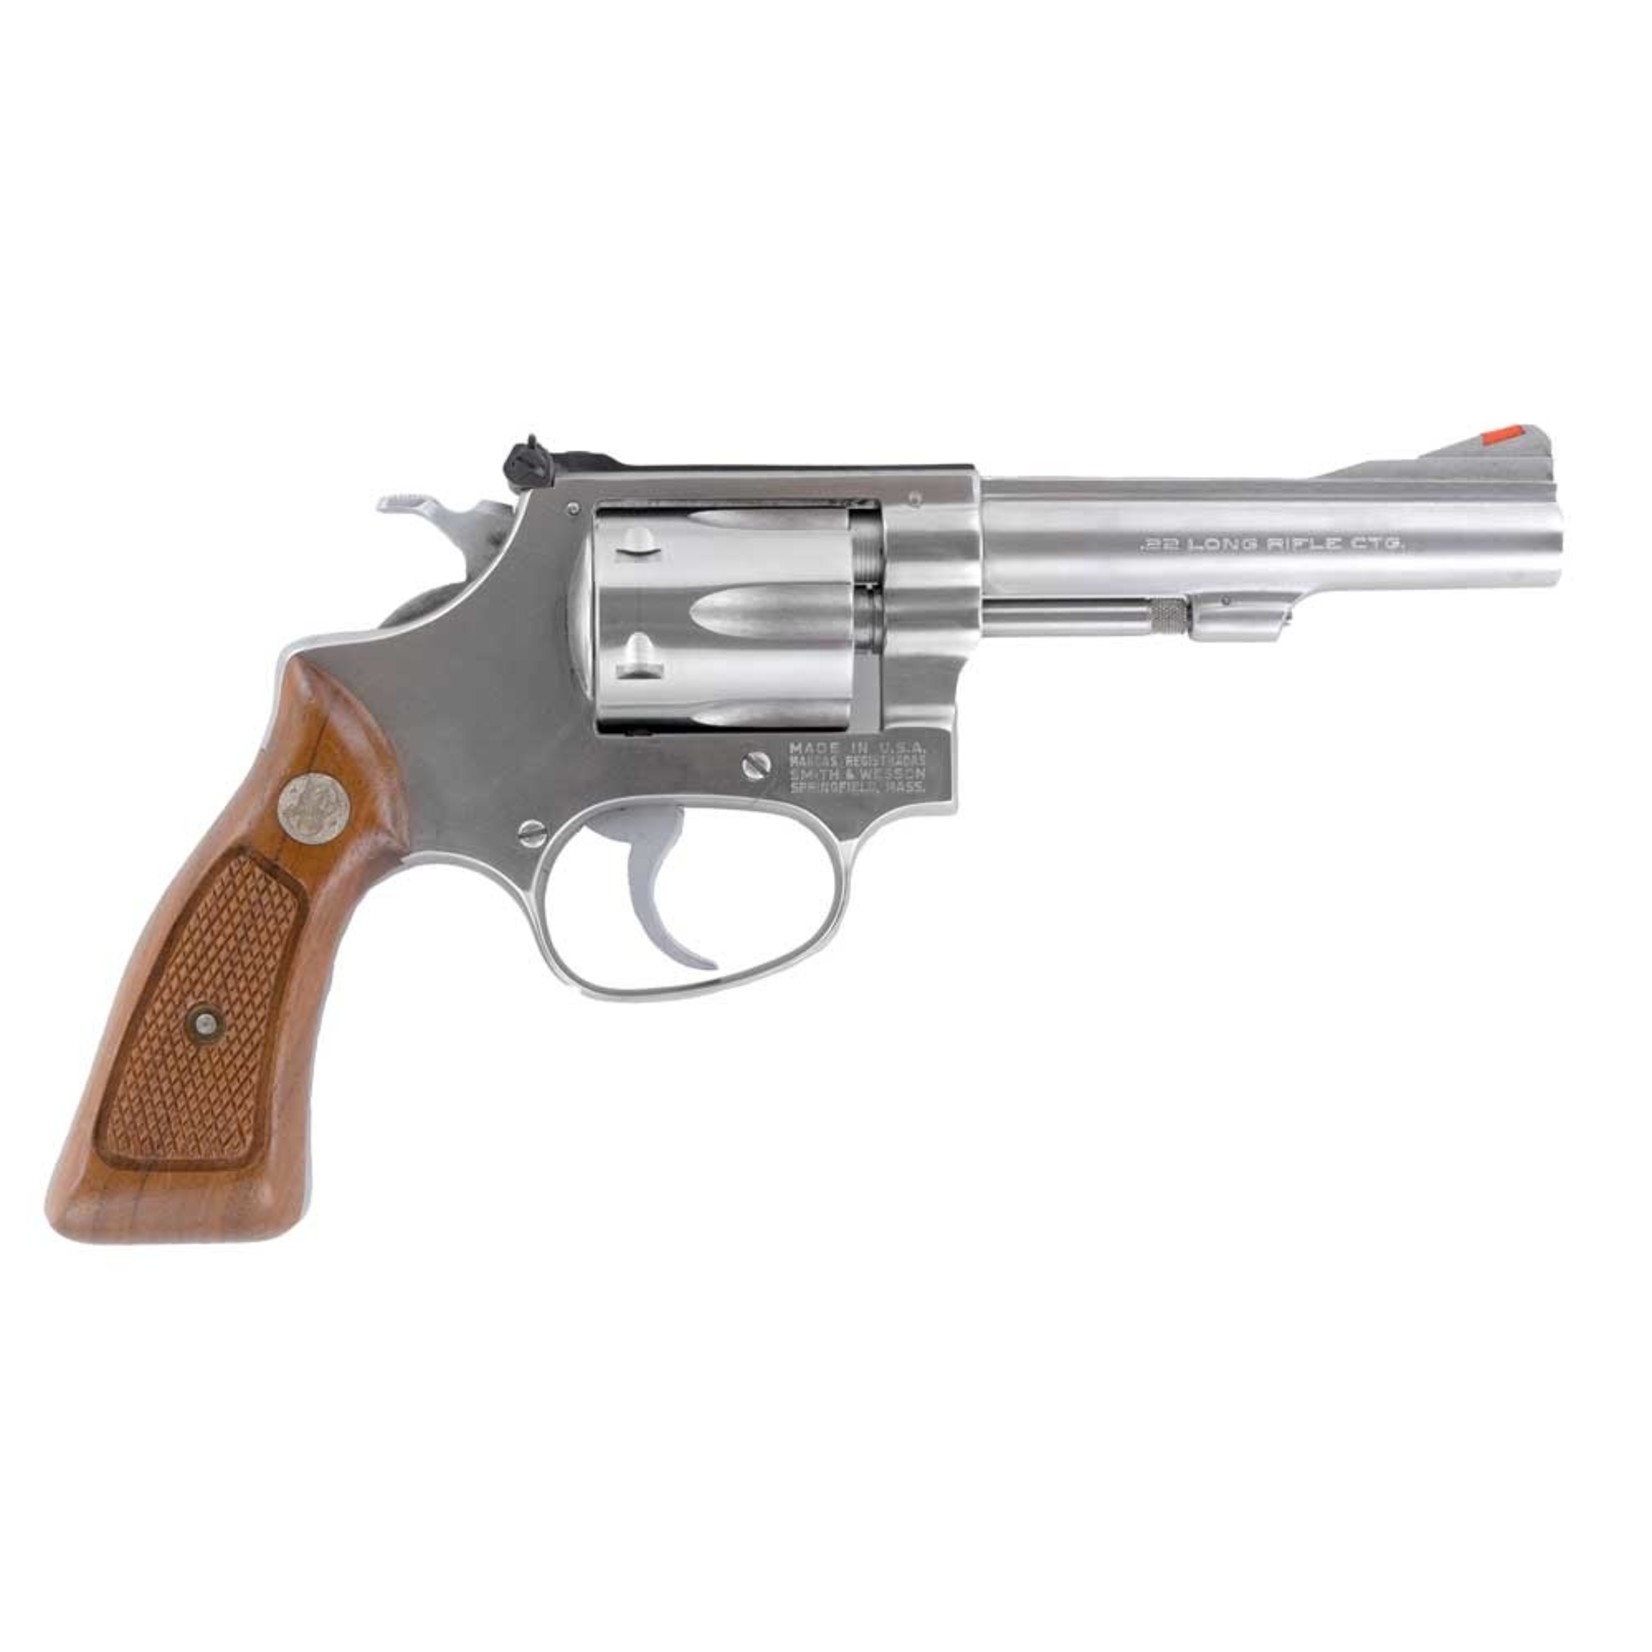 Smith and Wesson Smith & Wesson Model 63, .22LR